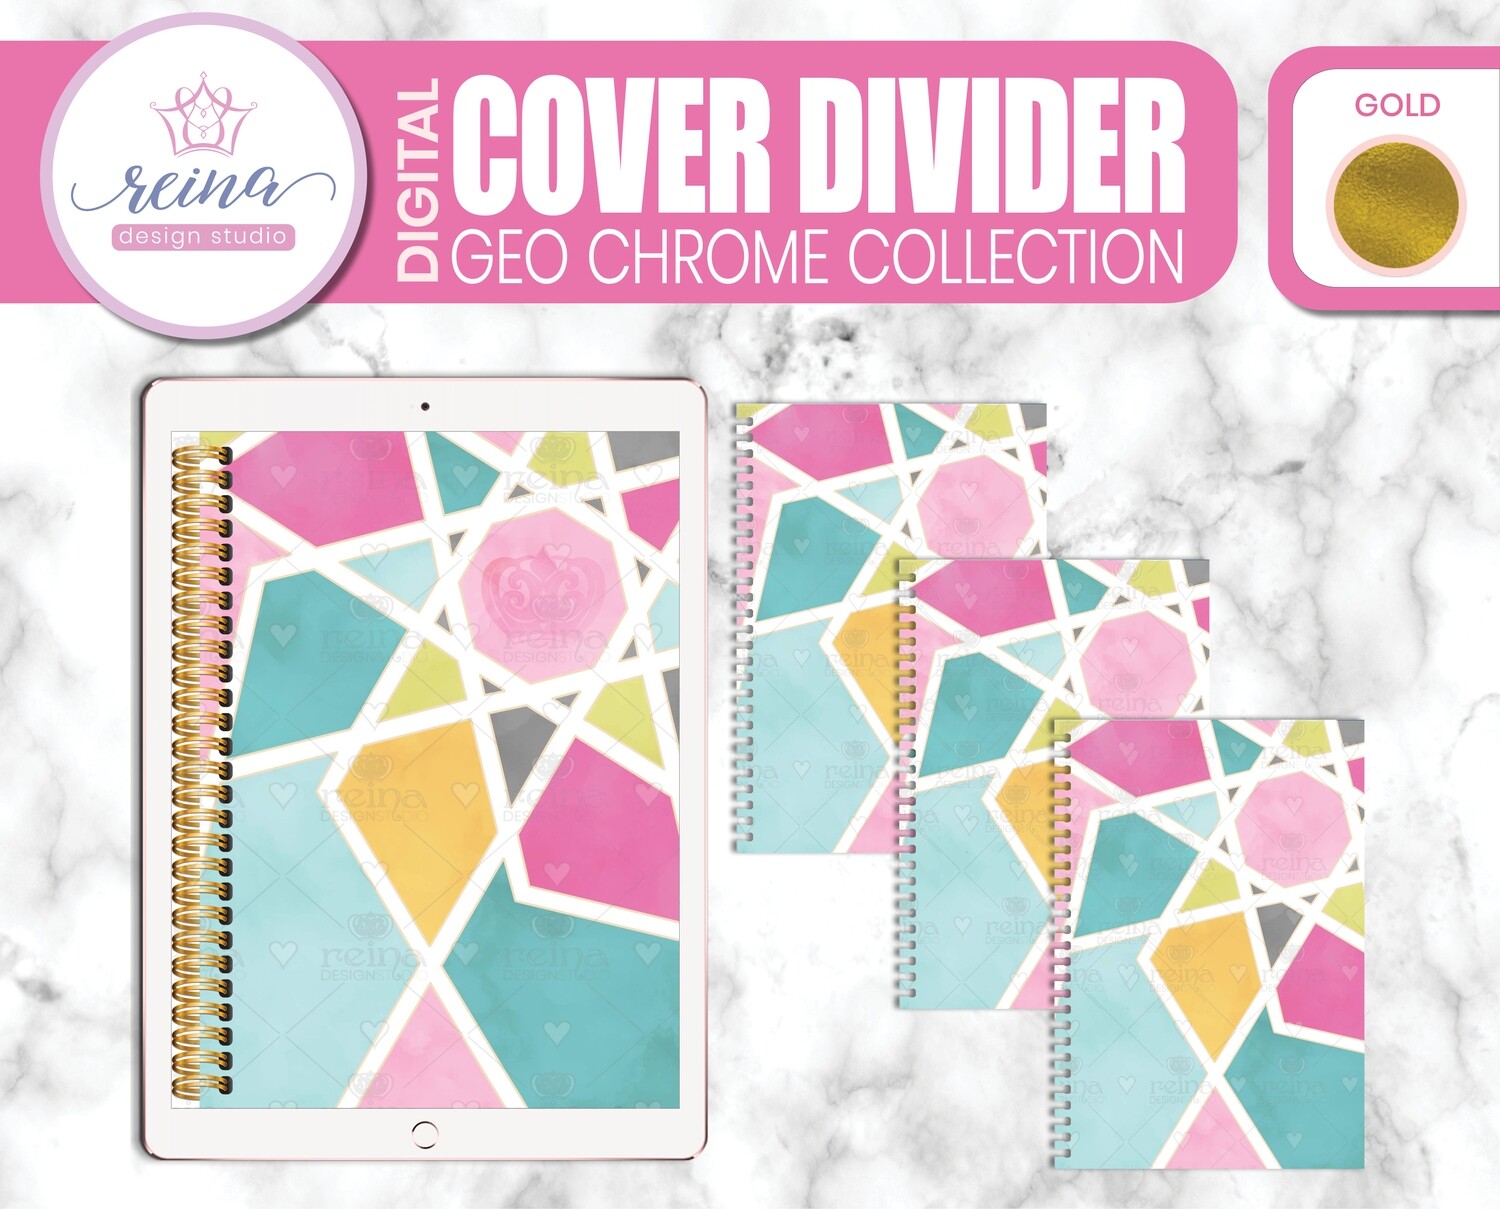 Interchangeable Digital Planner Cover and Dividers | Geo Chrome, Gold